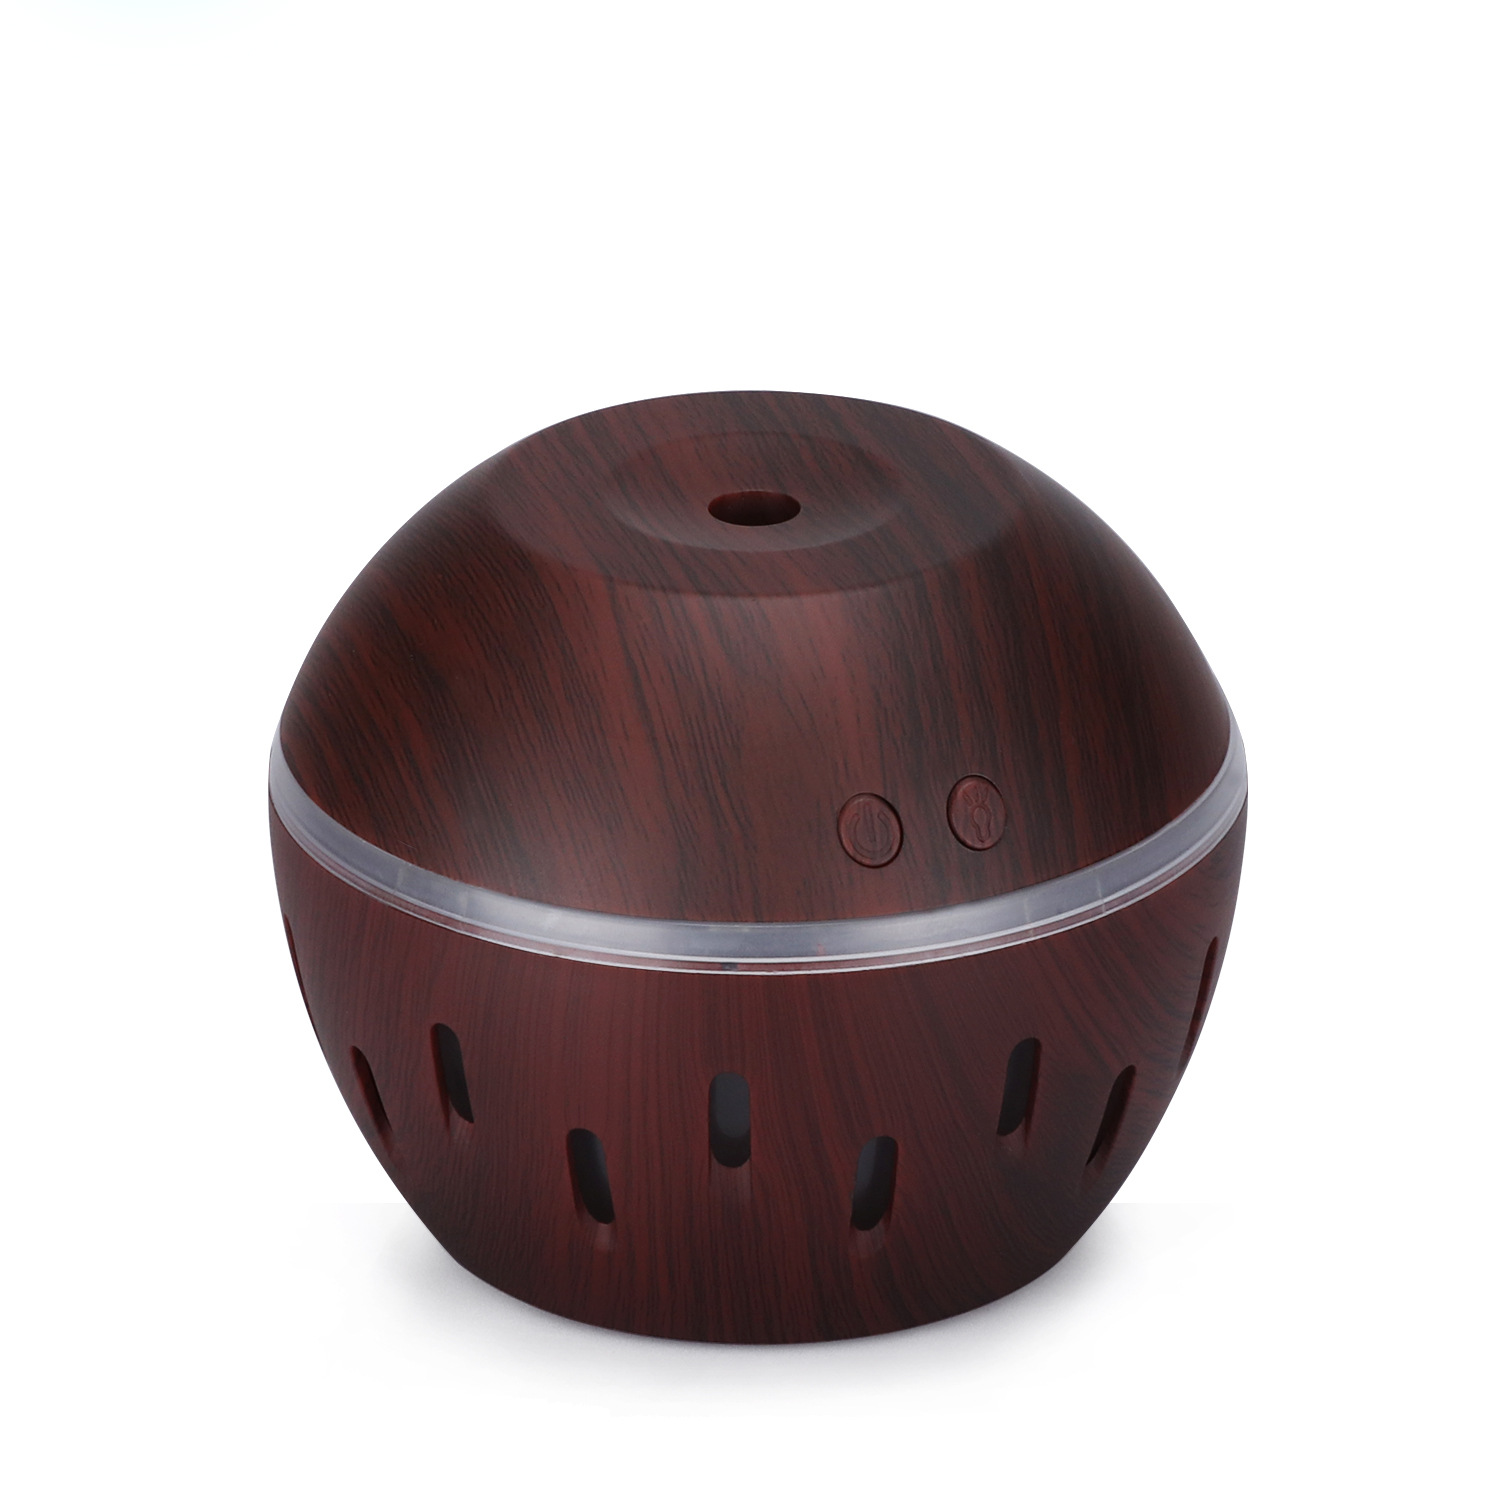 Factory directly China Cool Gadget No Water Aromatherapy Oil Diffuser Mini Humidifier Portable